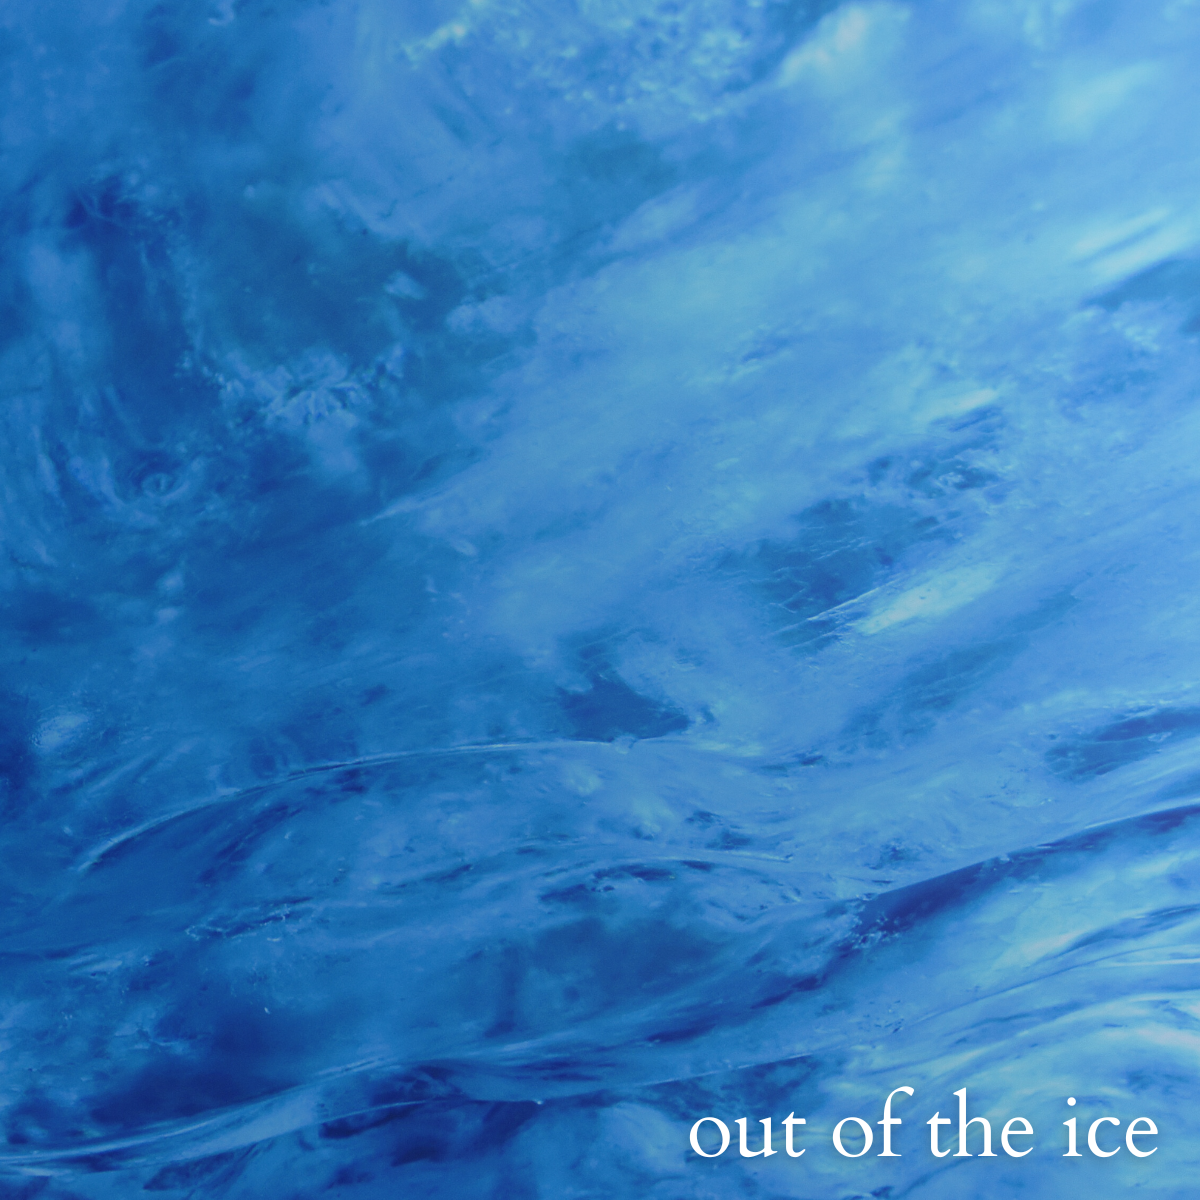 out of the ice / 岡本竜樹 featuring ほろぐらむ